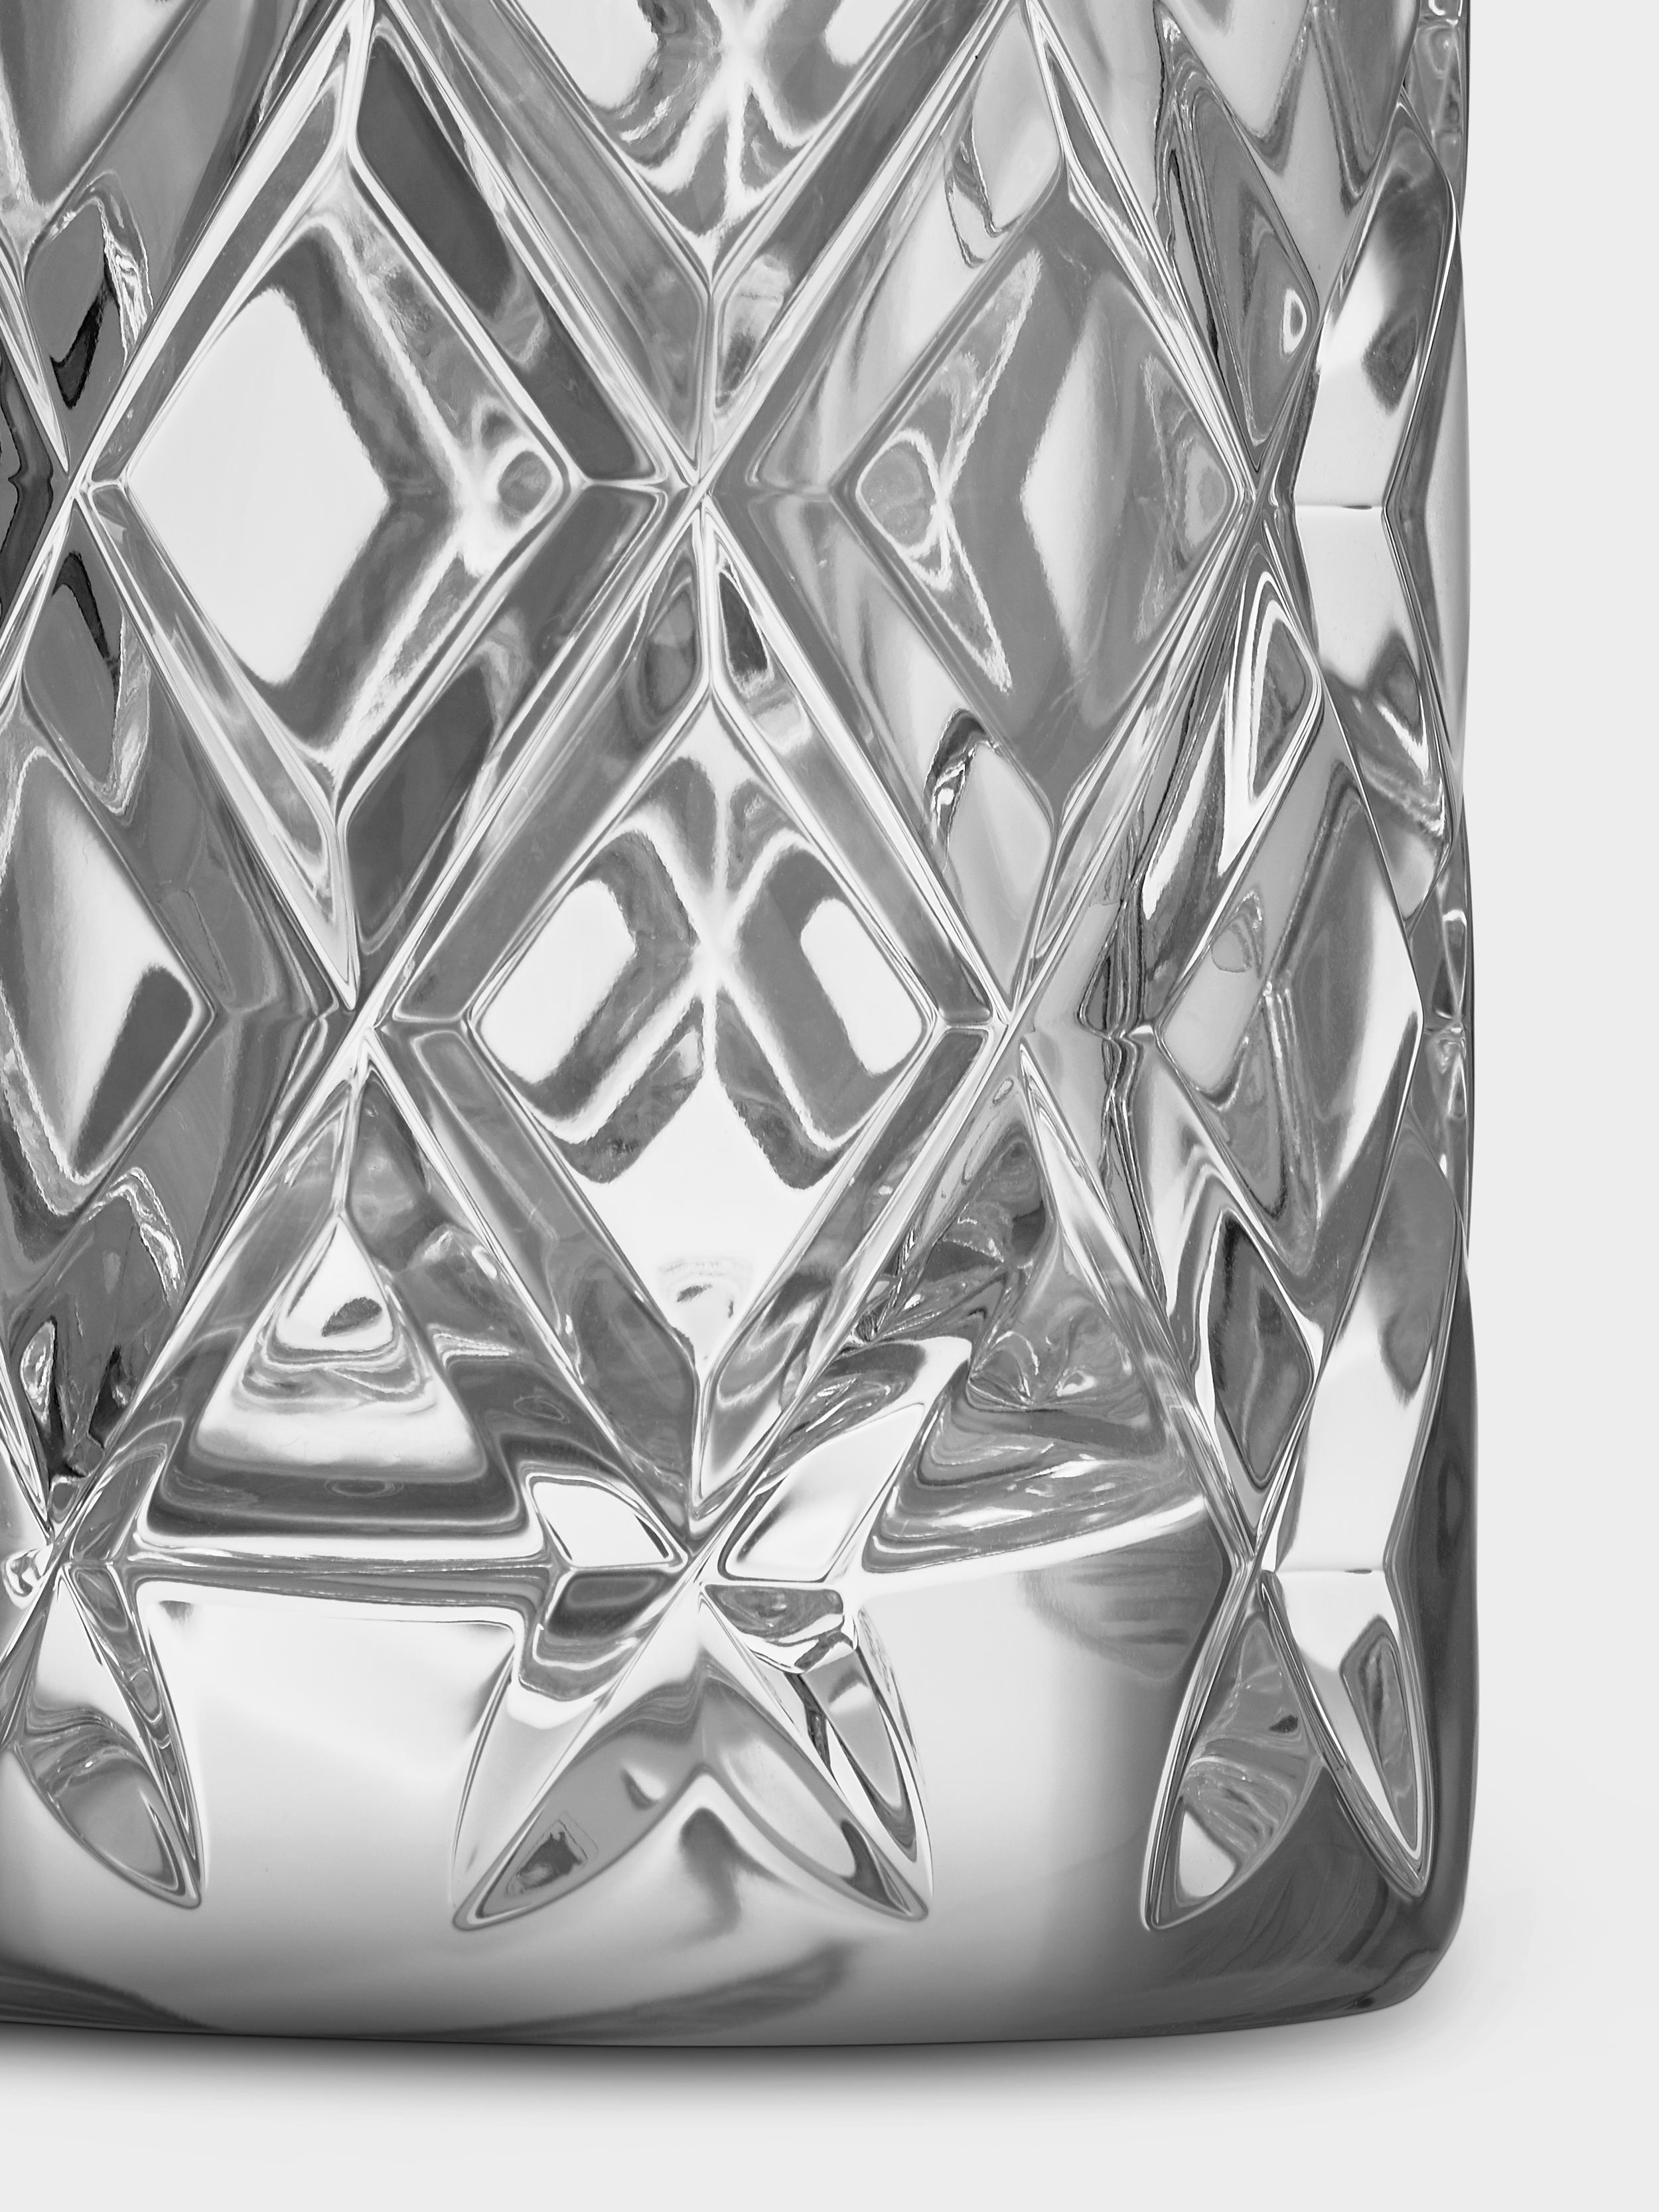 The vase in the Sofiero collection, designed by Gunnar Cyrén in 1960, is a timeless Scandinavian classic from Orrefors. It has a deep-cut motif, which beautifully refracts light in the thick crystal. Sofiero Vase is both decorative and functional,